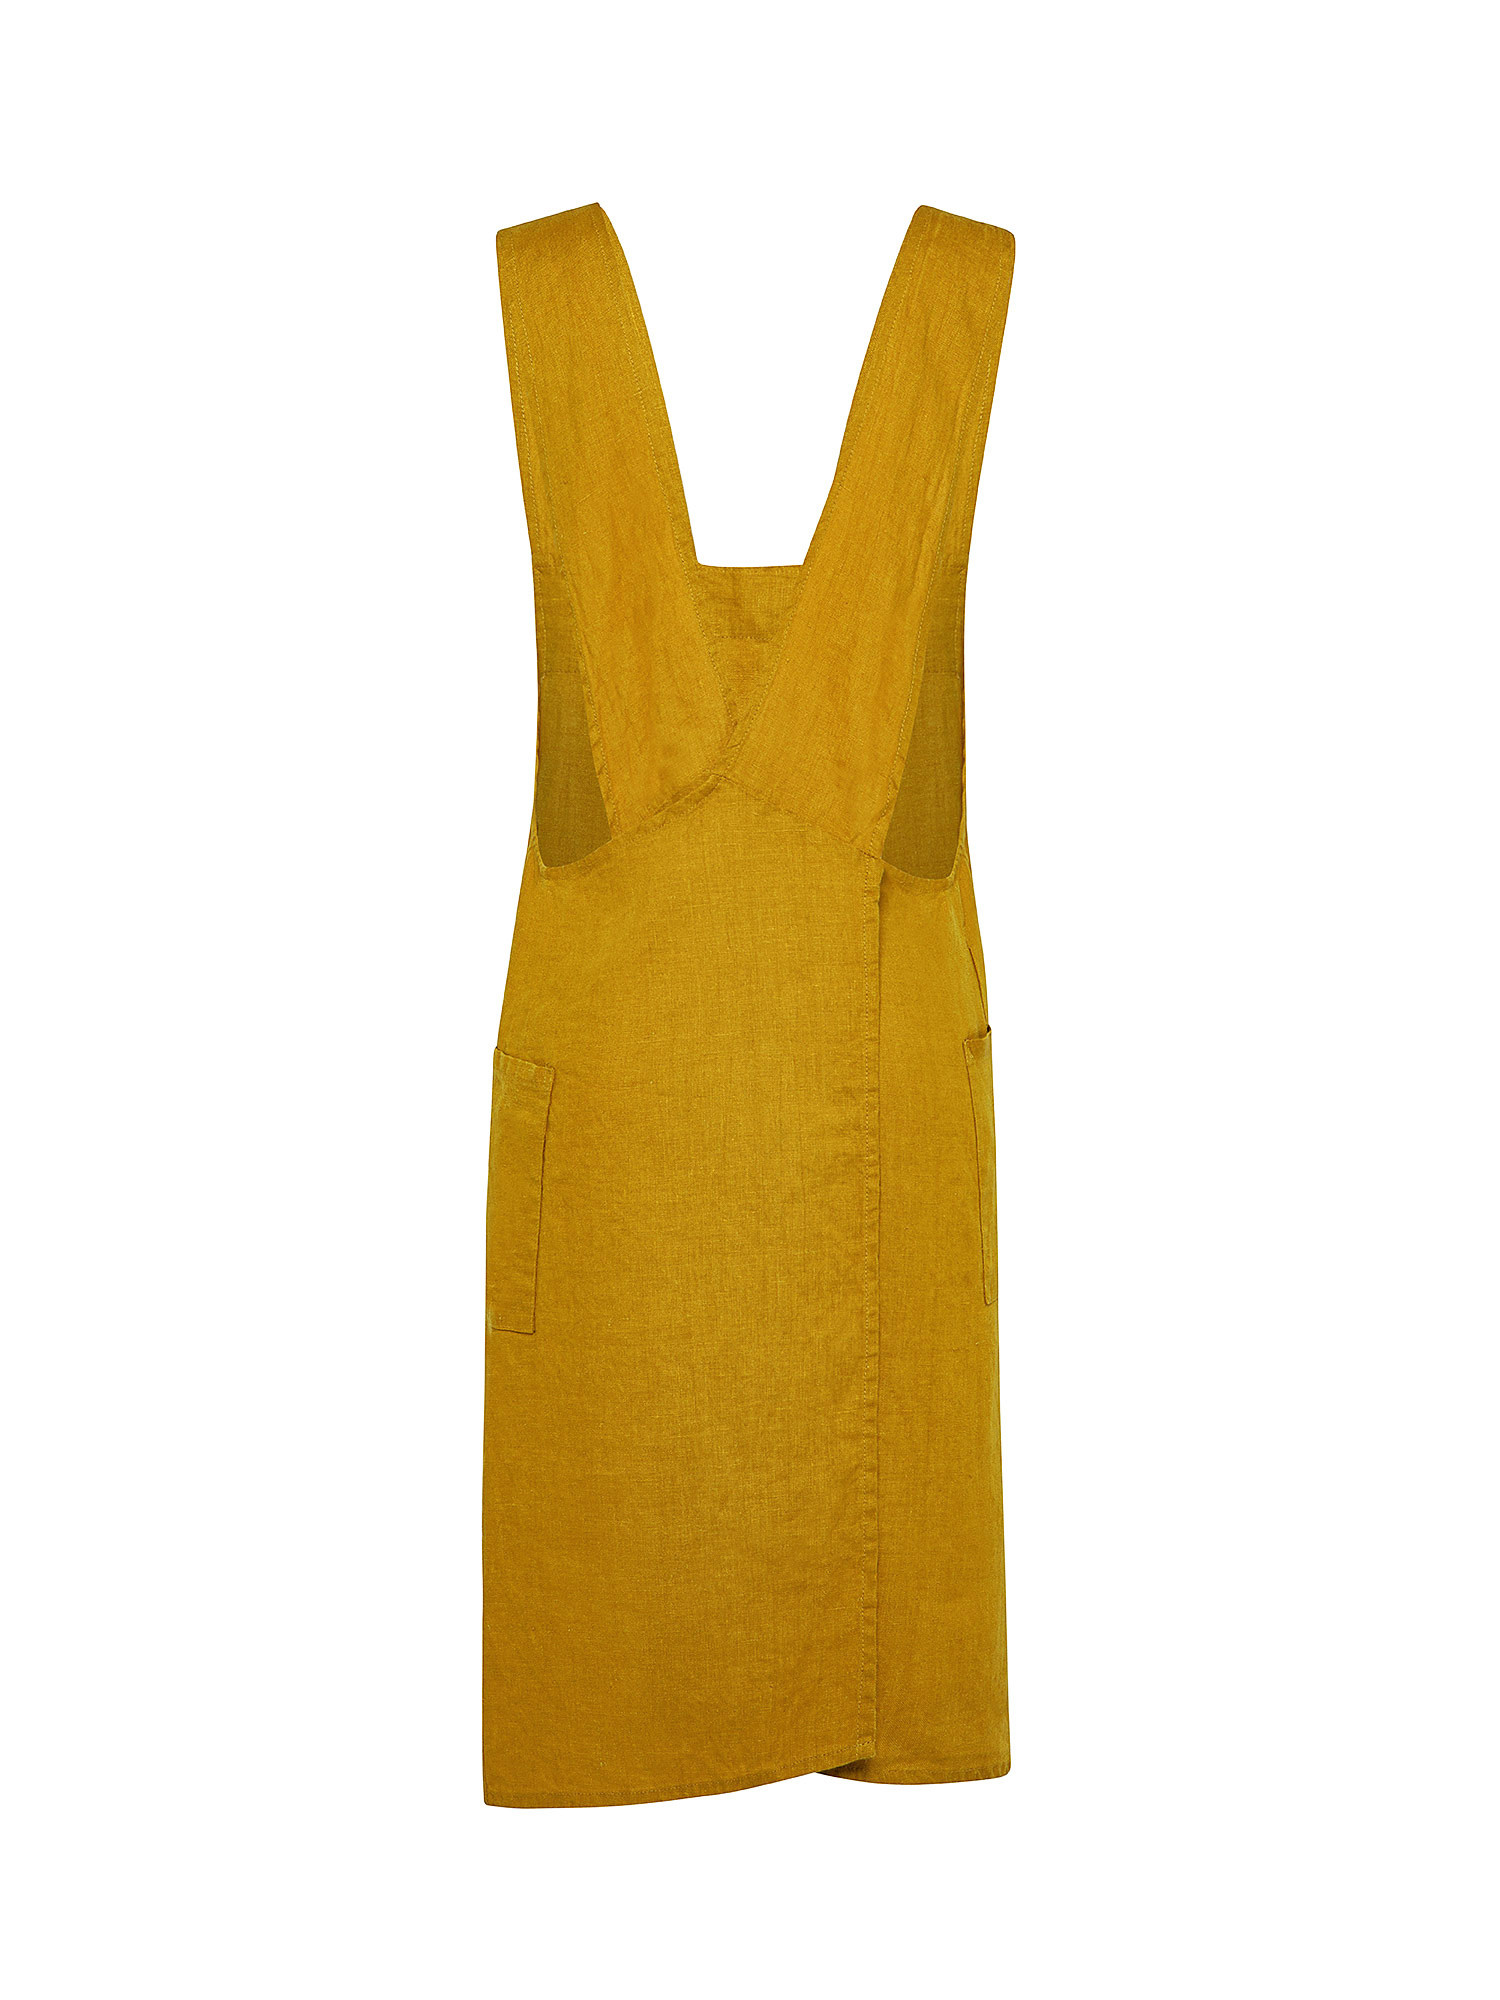 Solid color washed linen kitchen apron, Ocra Yellow, large image number 1